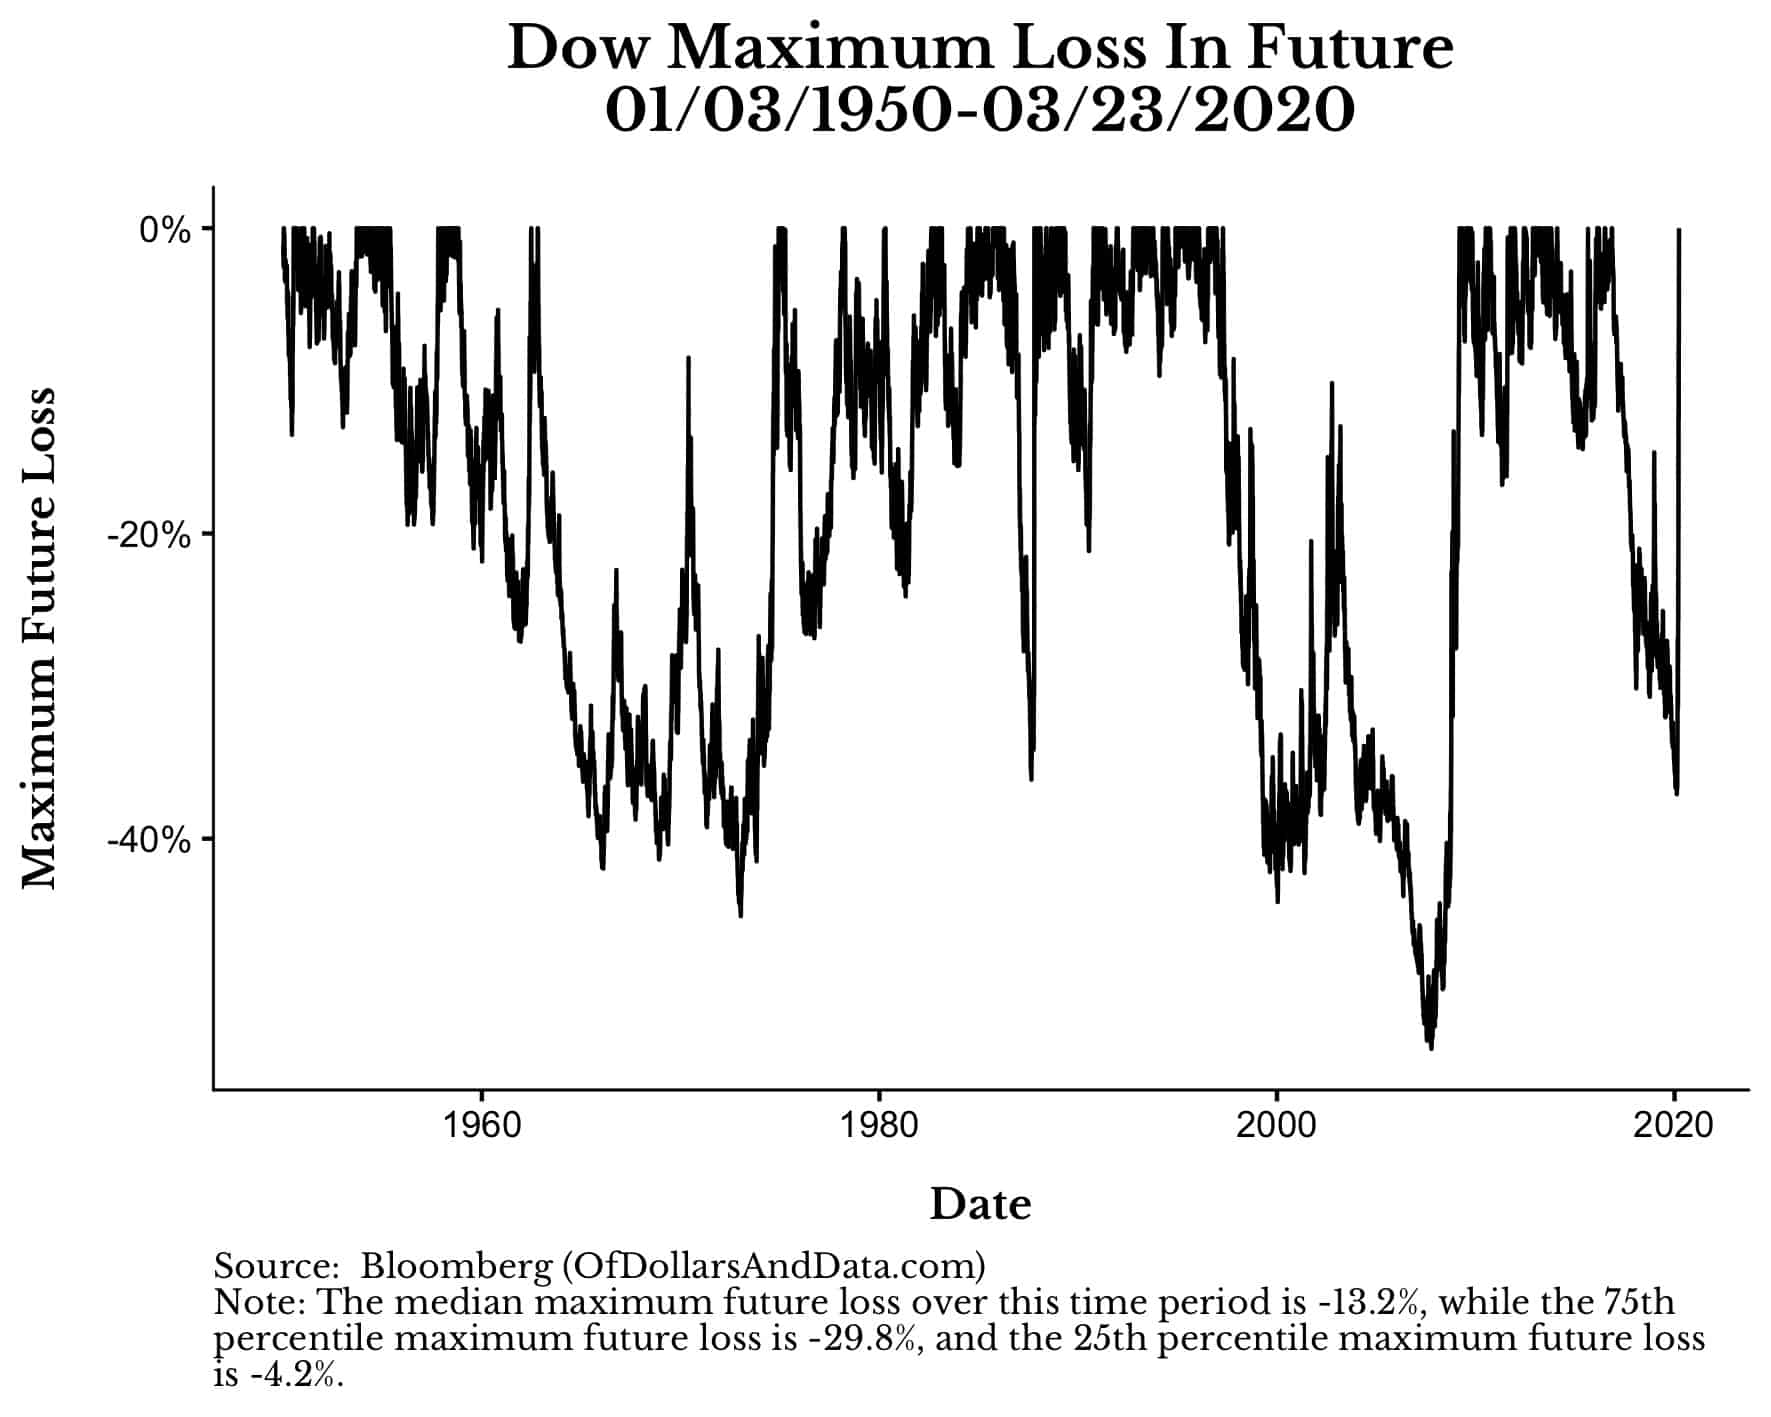 Dow Jones Industrial Average Maximum loss in its future from 1950 to 2020.